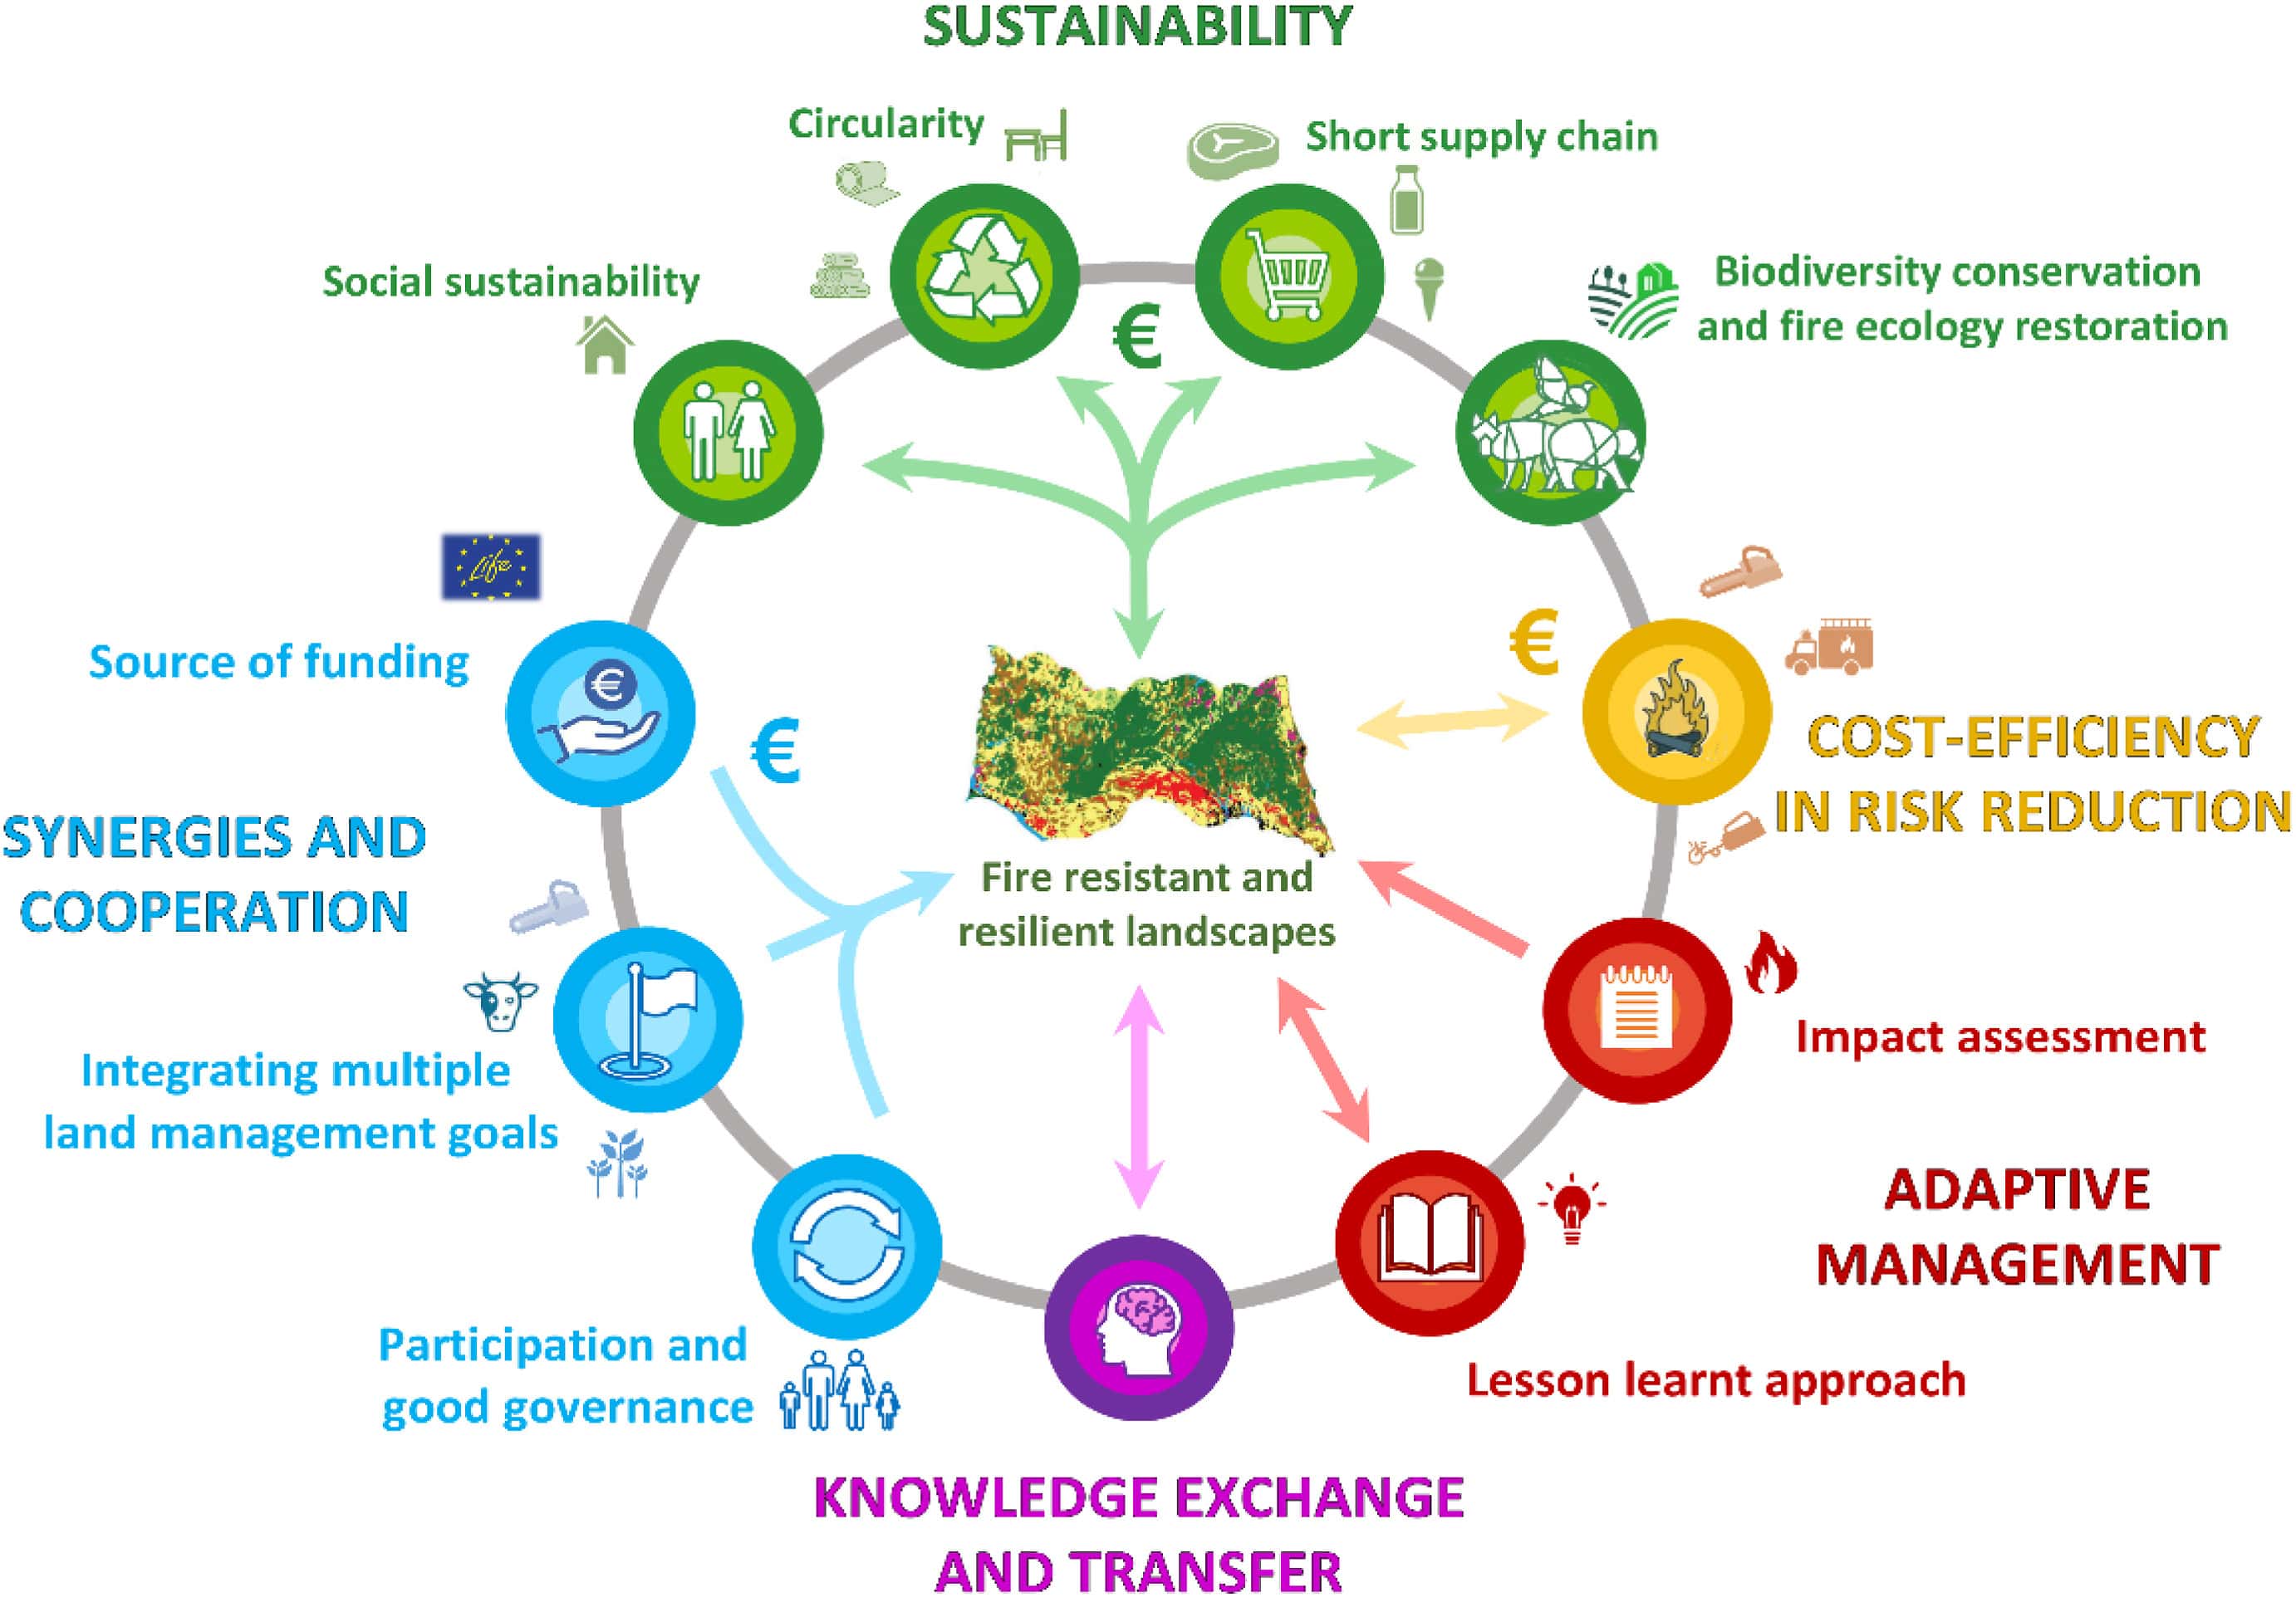 Illustration showing the co-benefits of disaster risk reduction: sustainability, synergies and cooperation, adaptive management, knowledge exchange and transfer